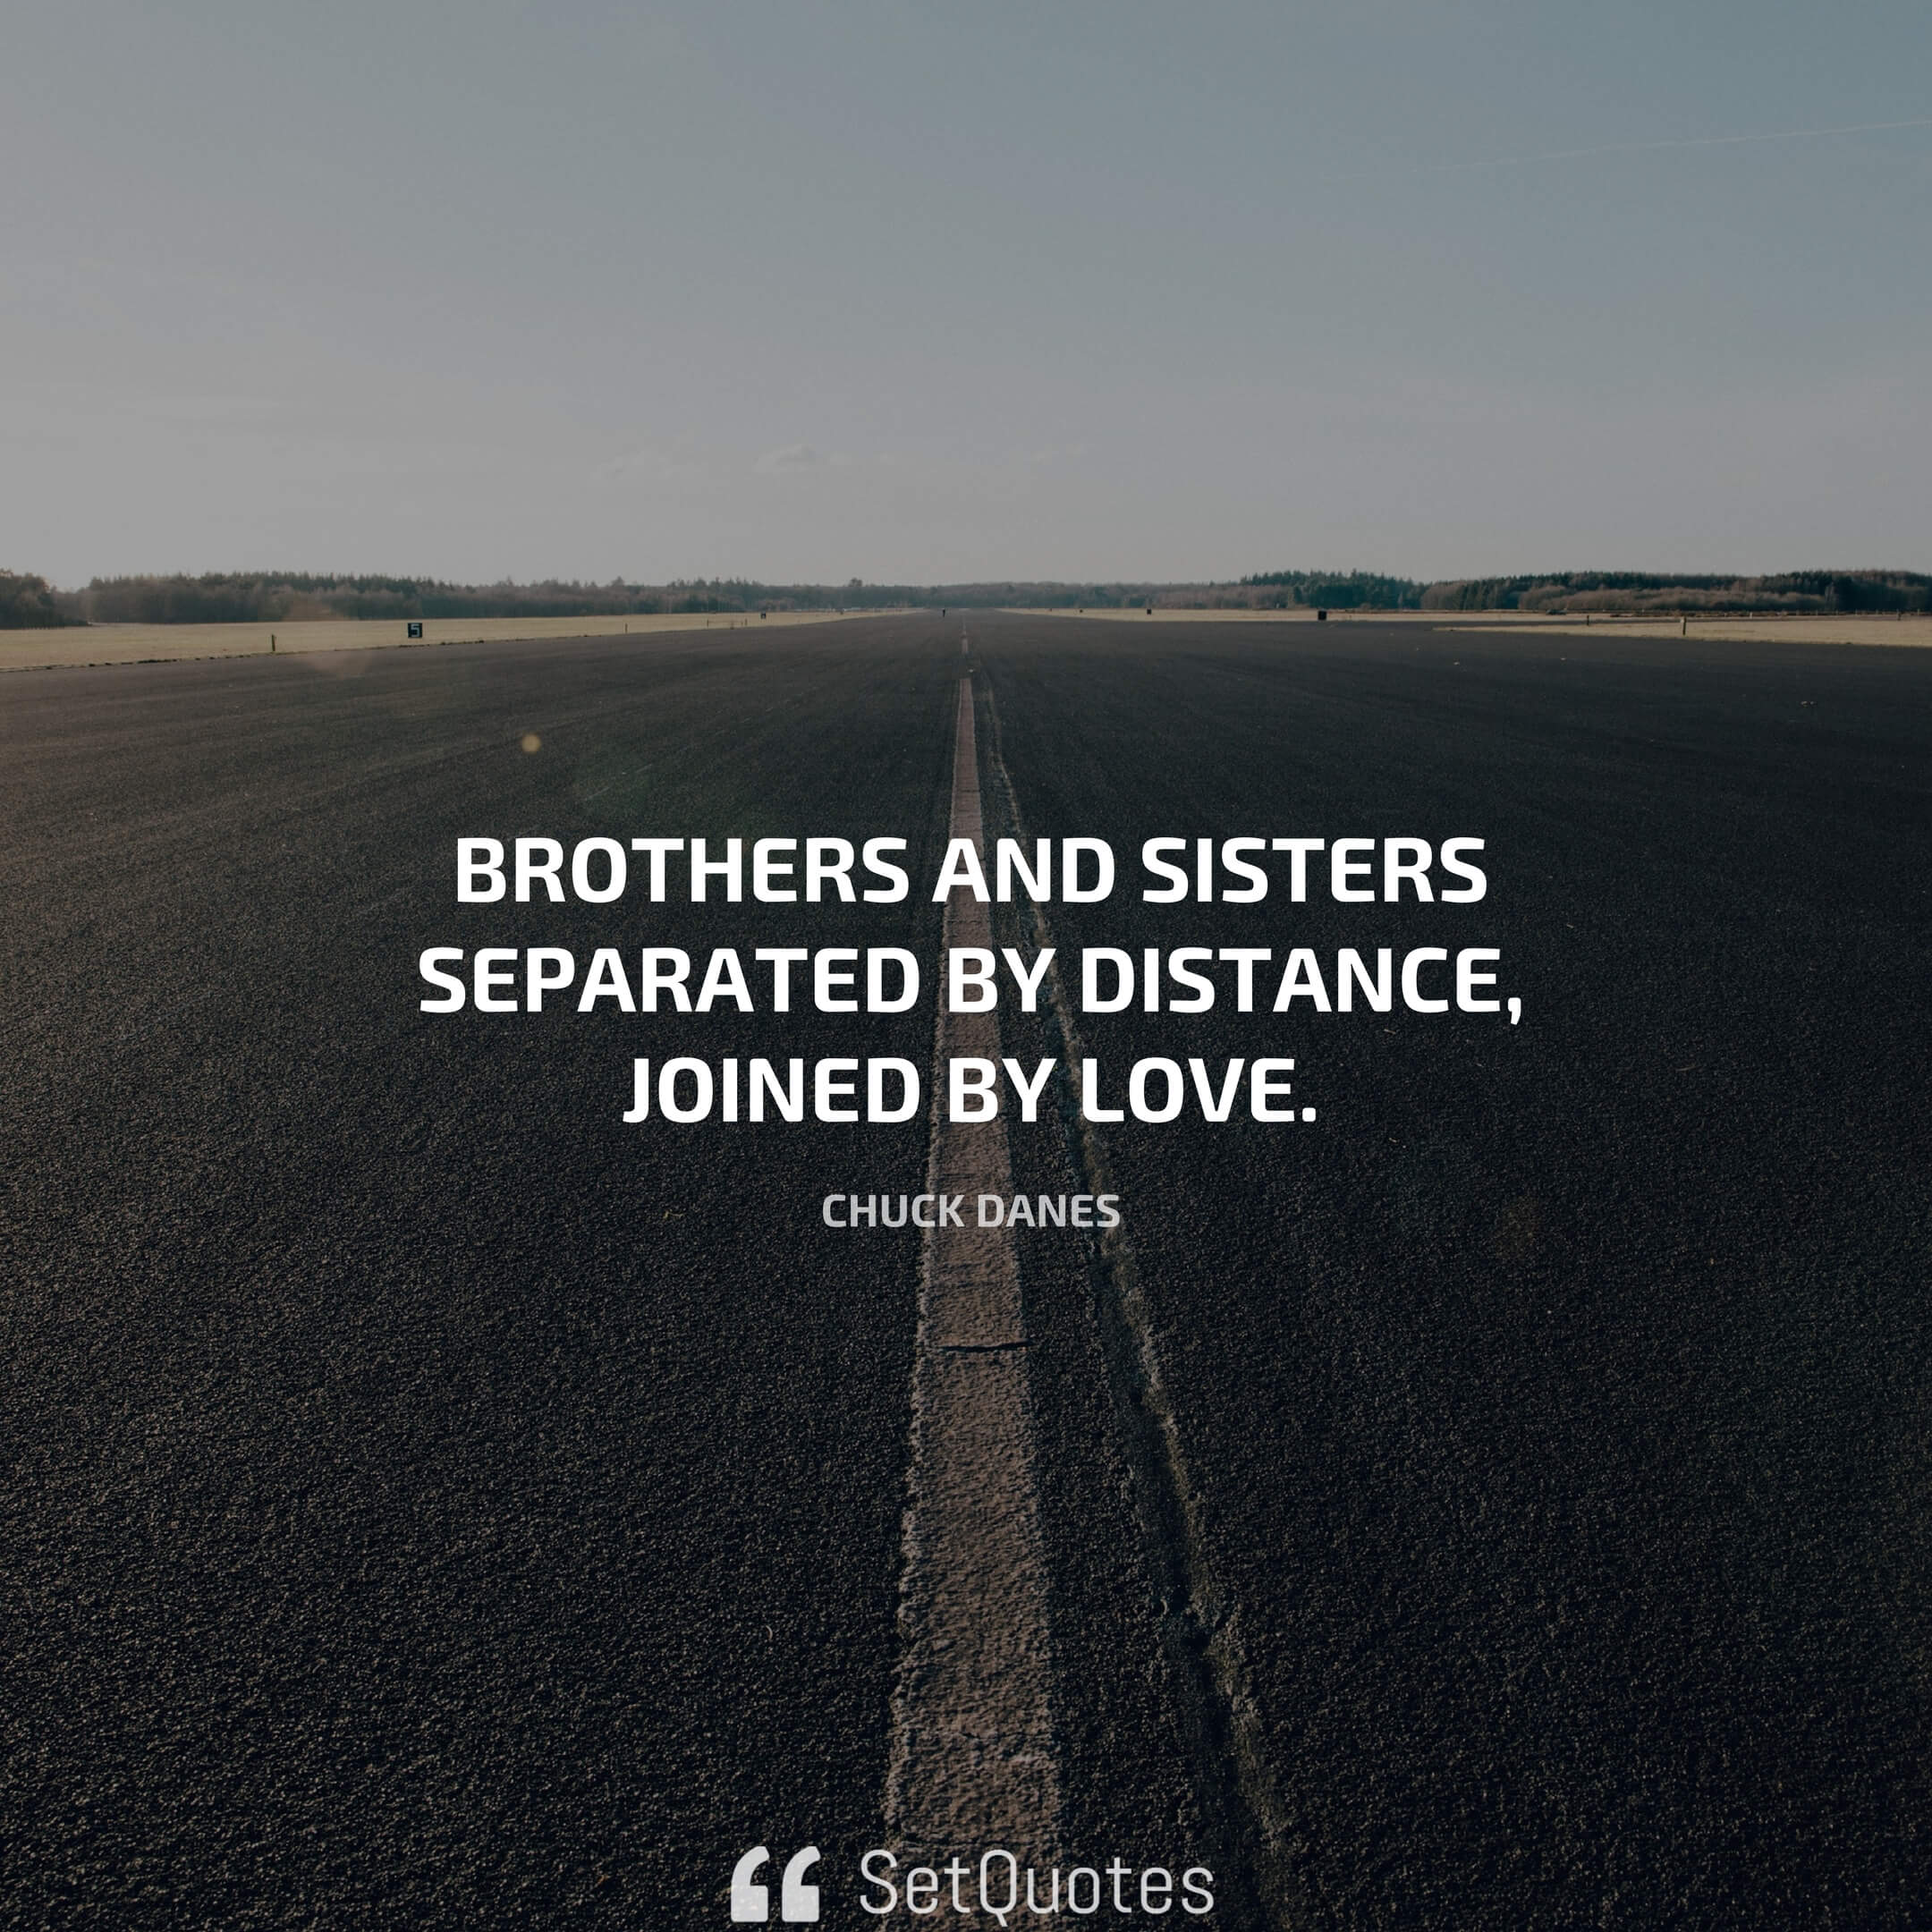 Brothers and sisters separated by distance, joined by love. – Chuck Danes